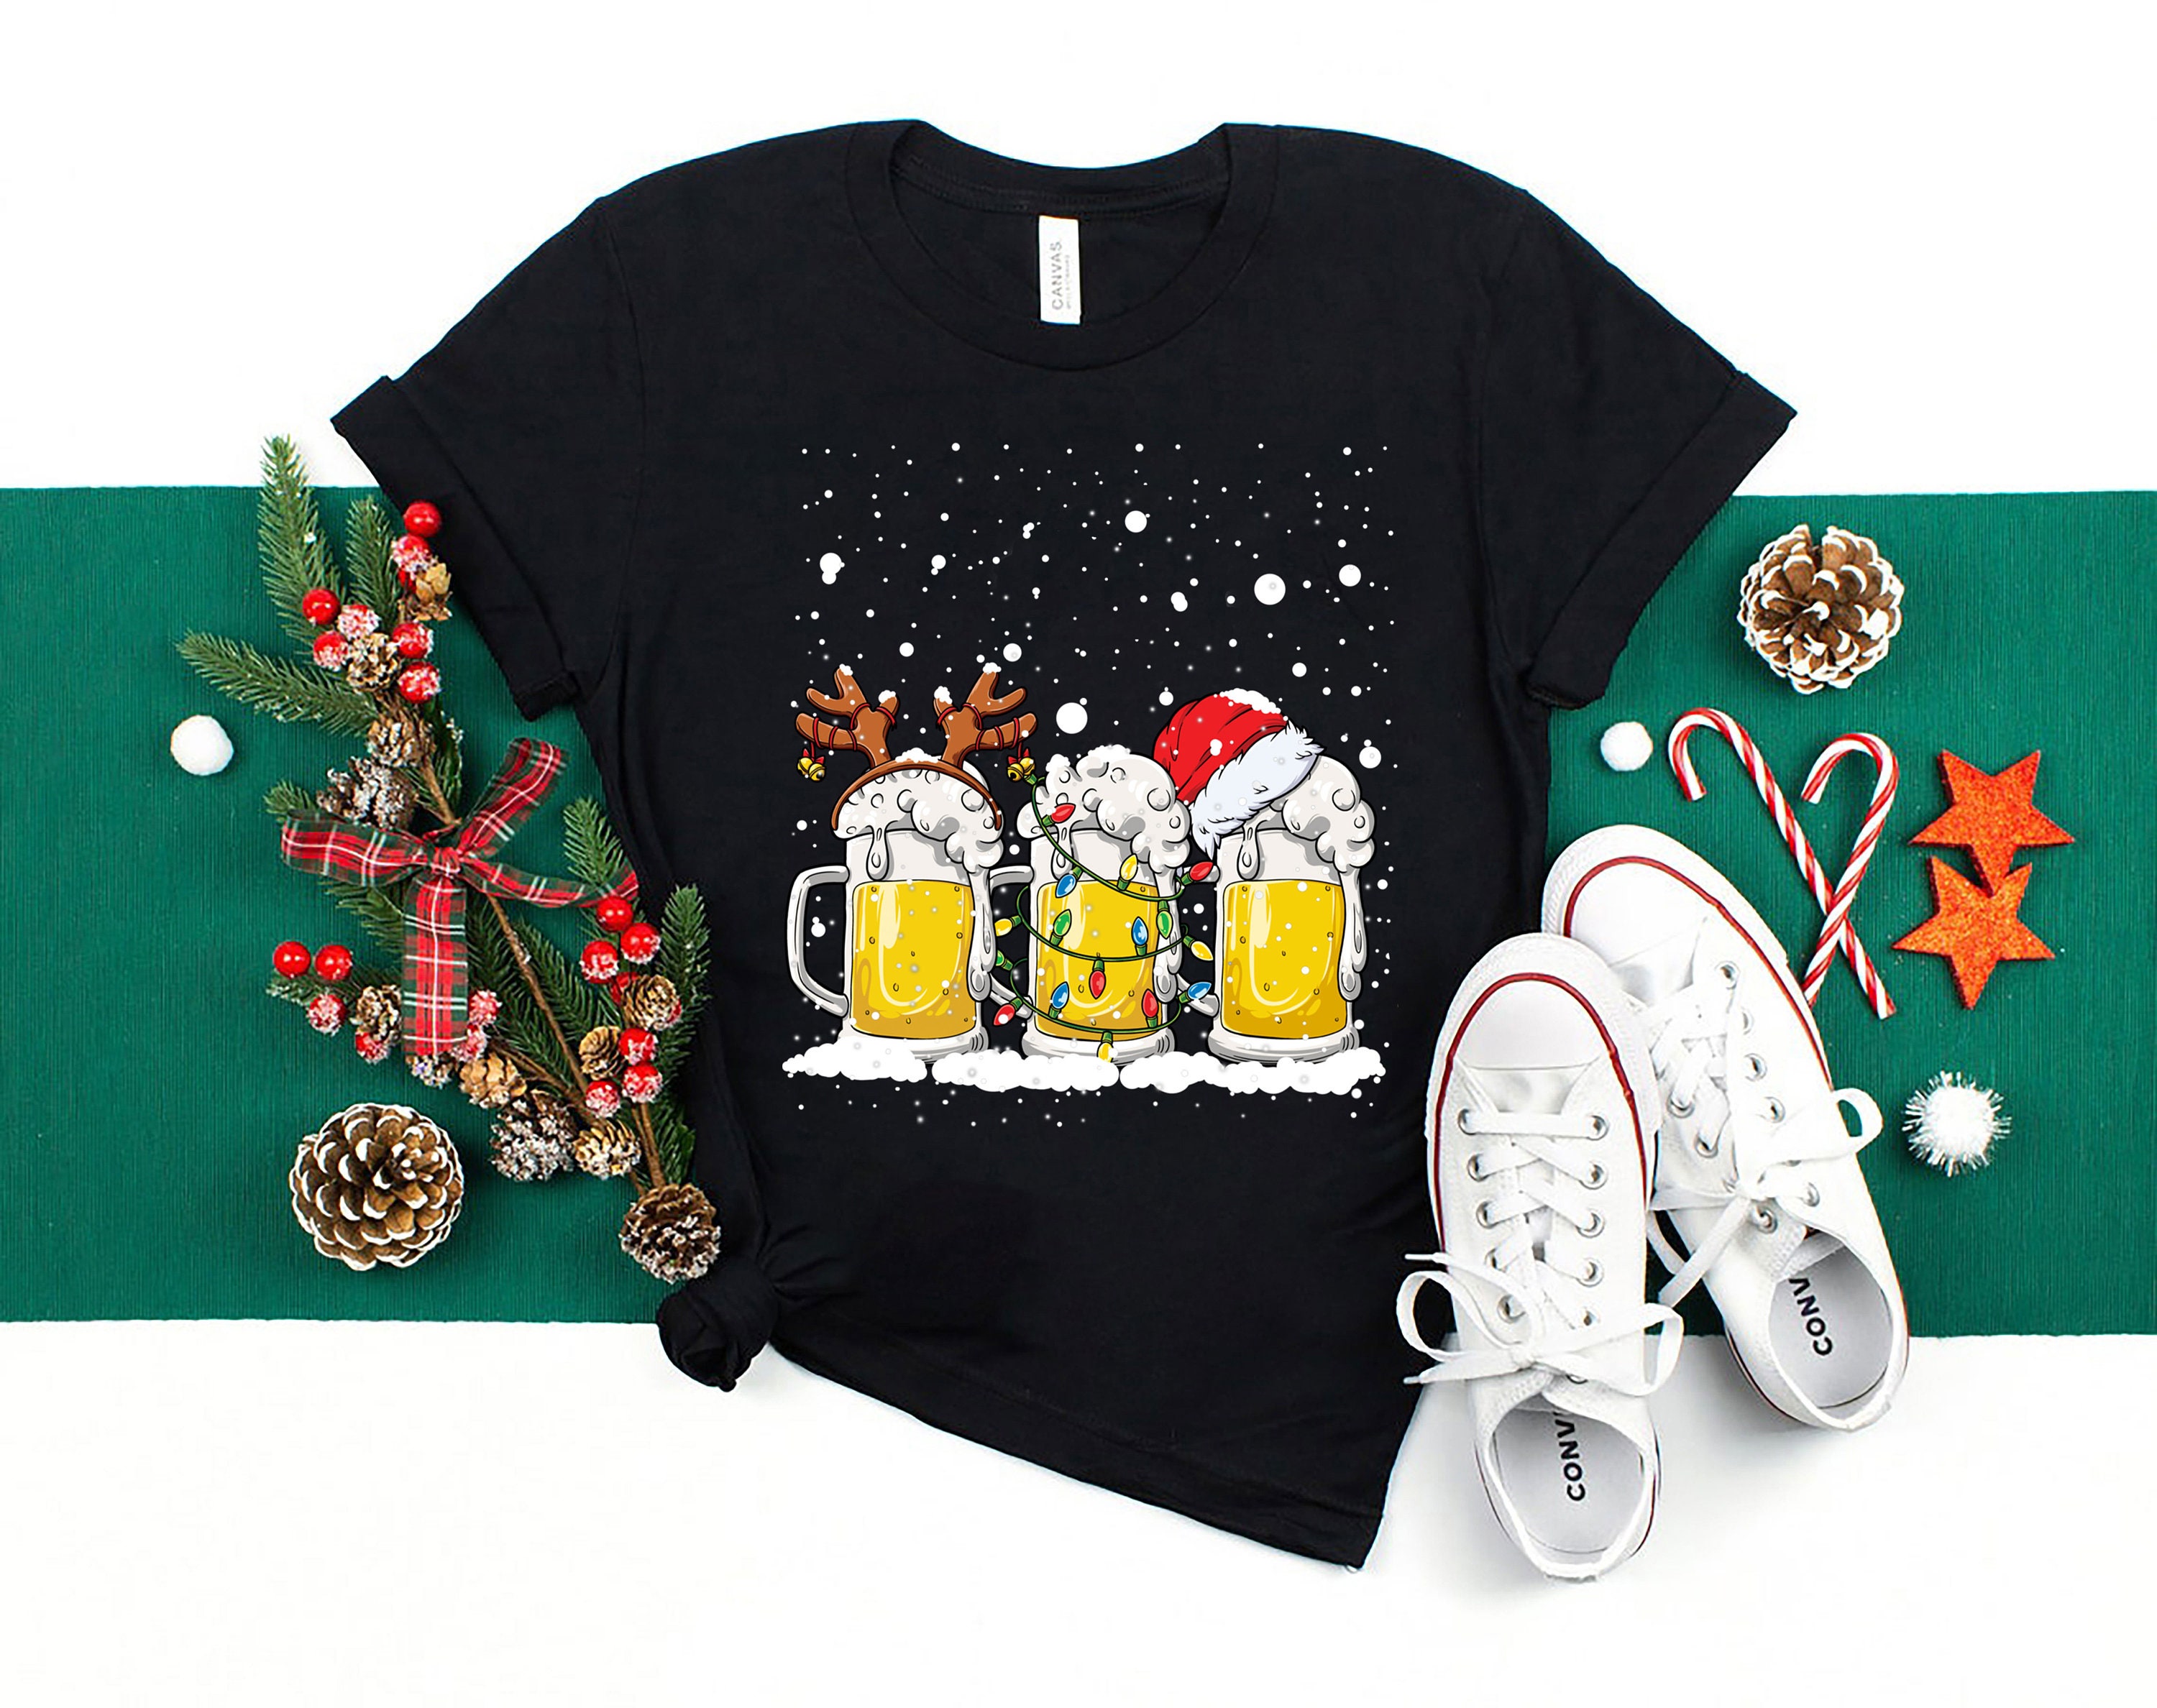 Christmas Beer Shirt Most Wonderful Time for a Beer T-shirt